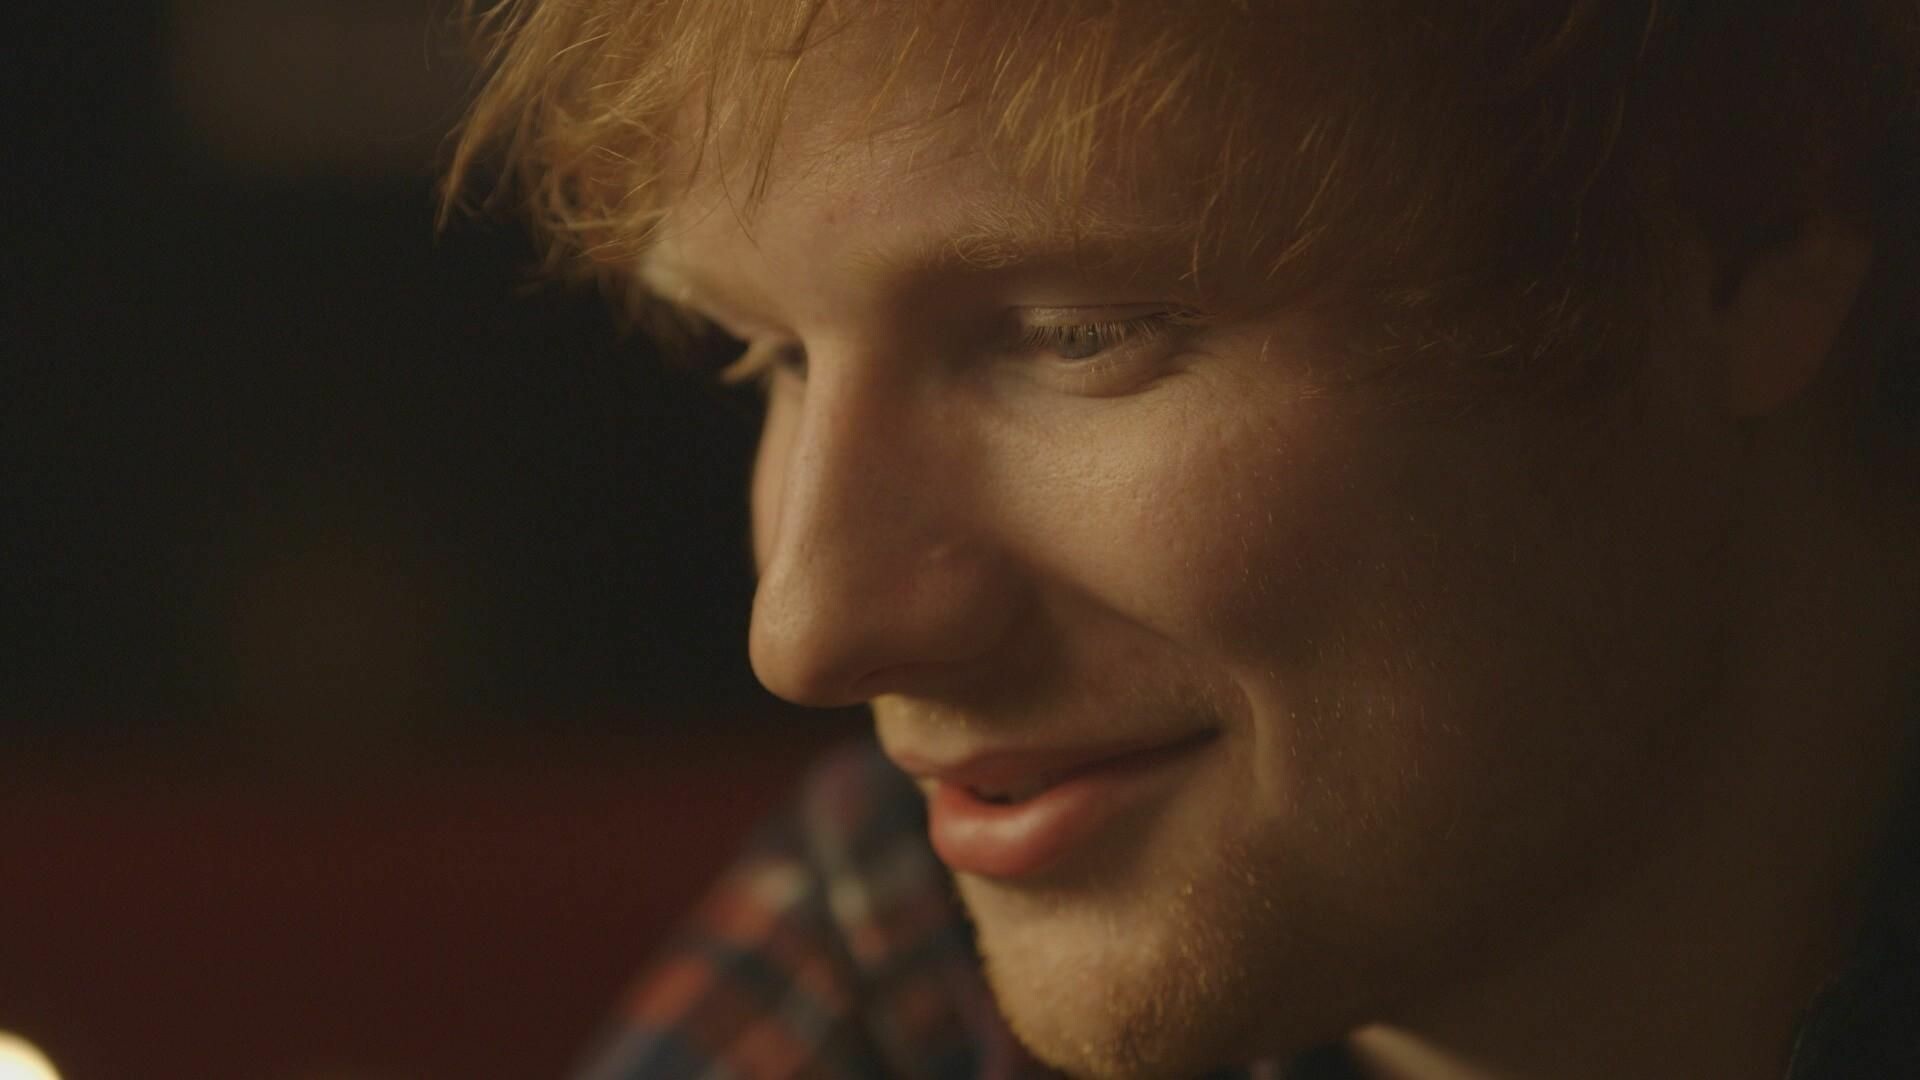 Ed Sheeran: "Supermarket Flowers" was released as a promotional single on 3 March 2017. 1920x1080 Full HD Wallpaper.